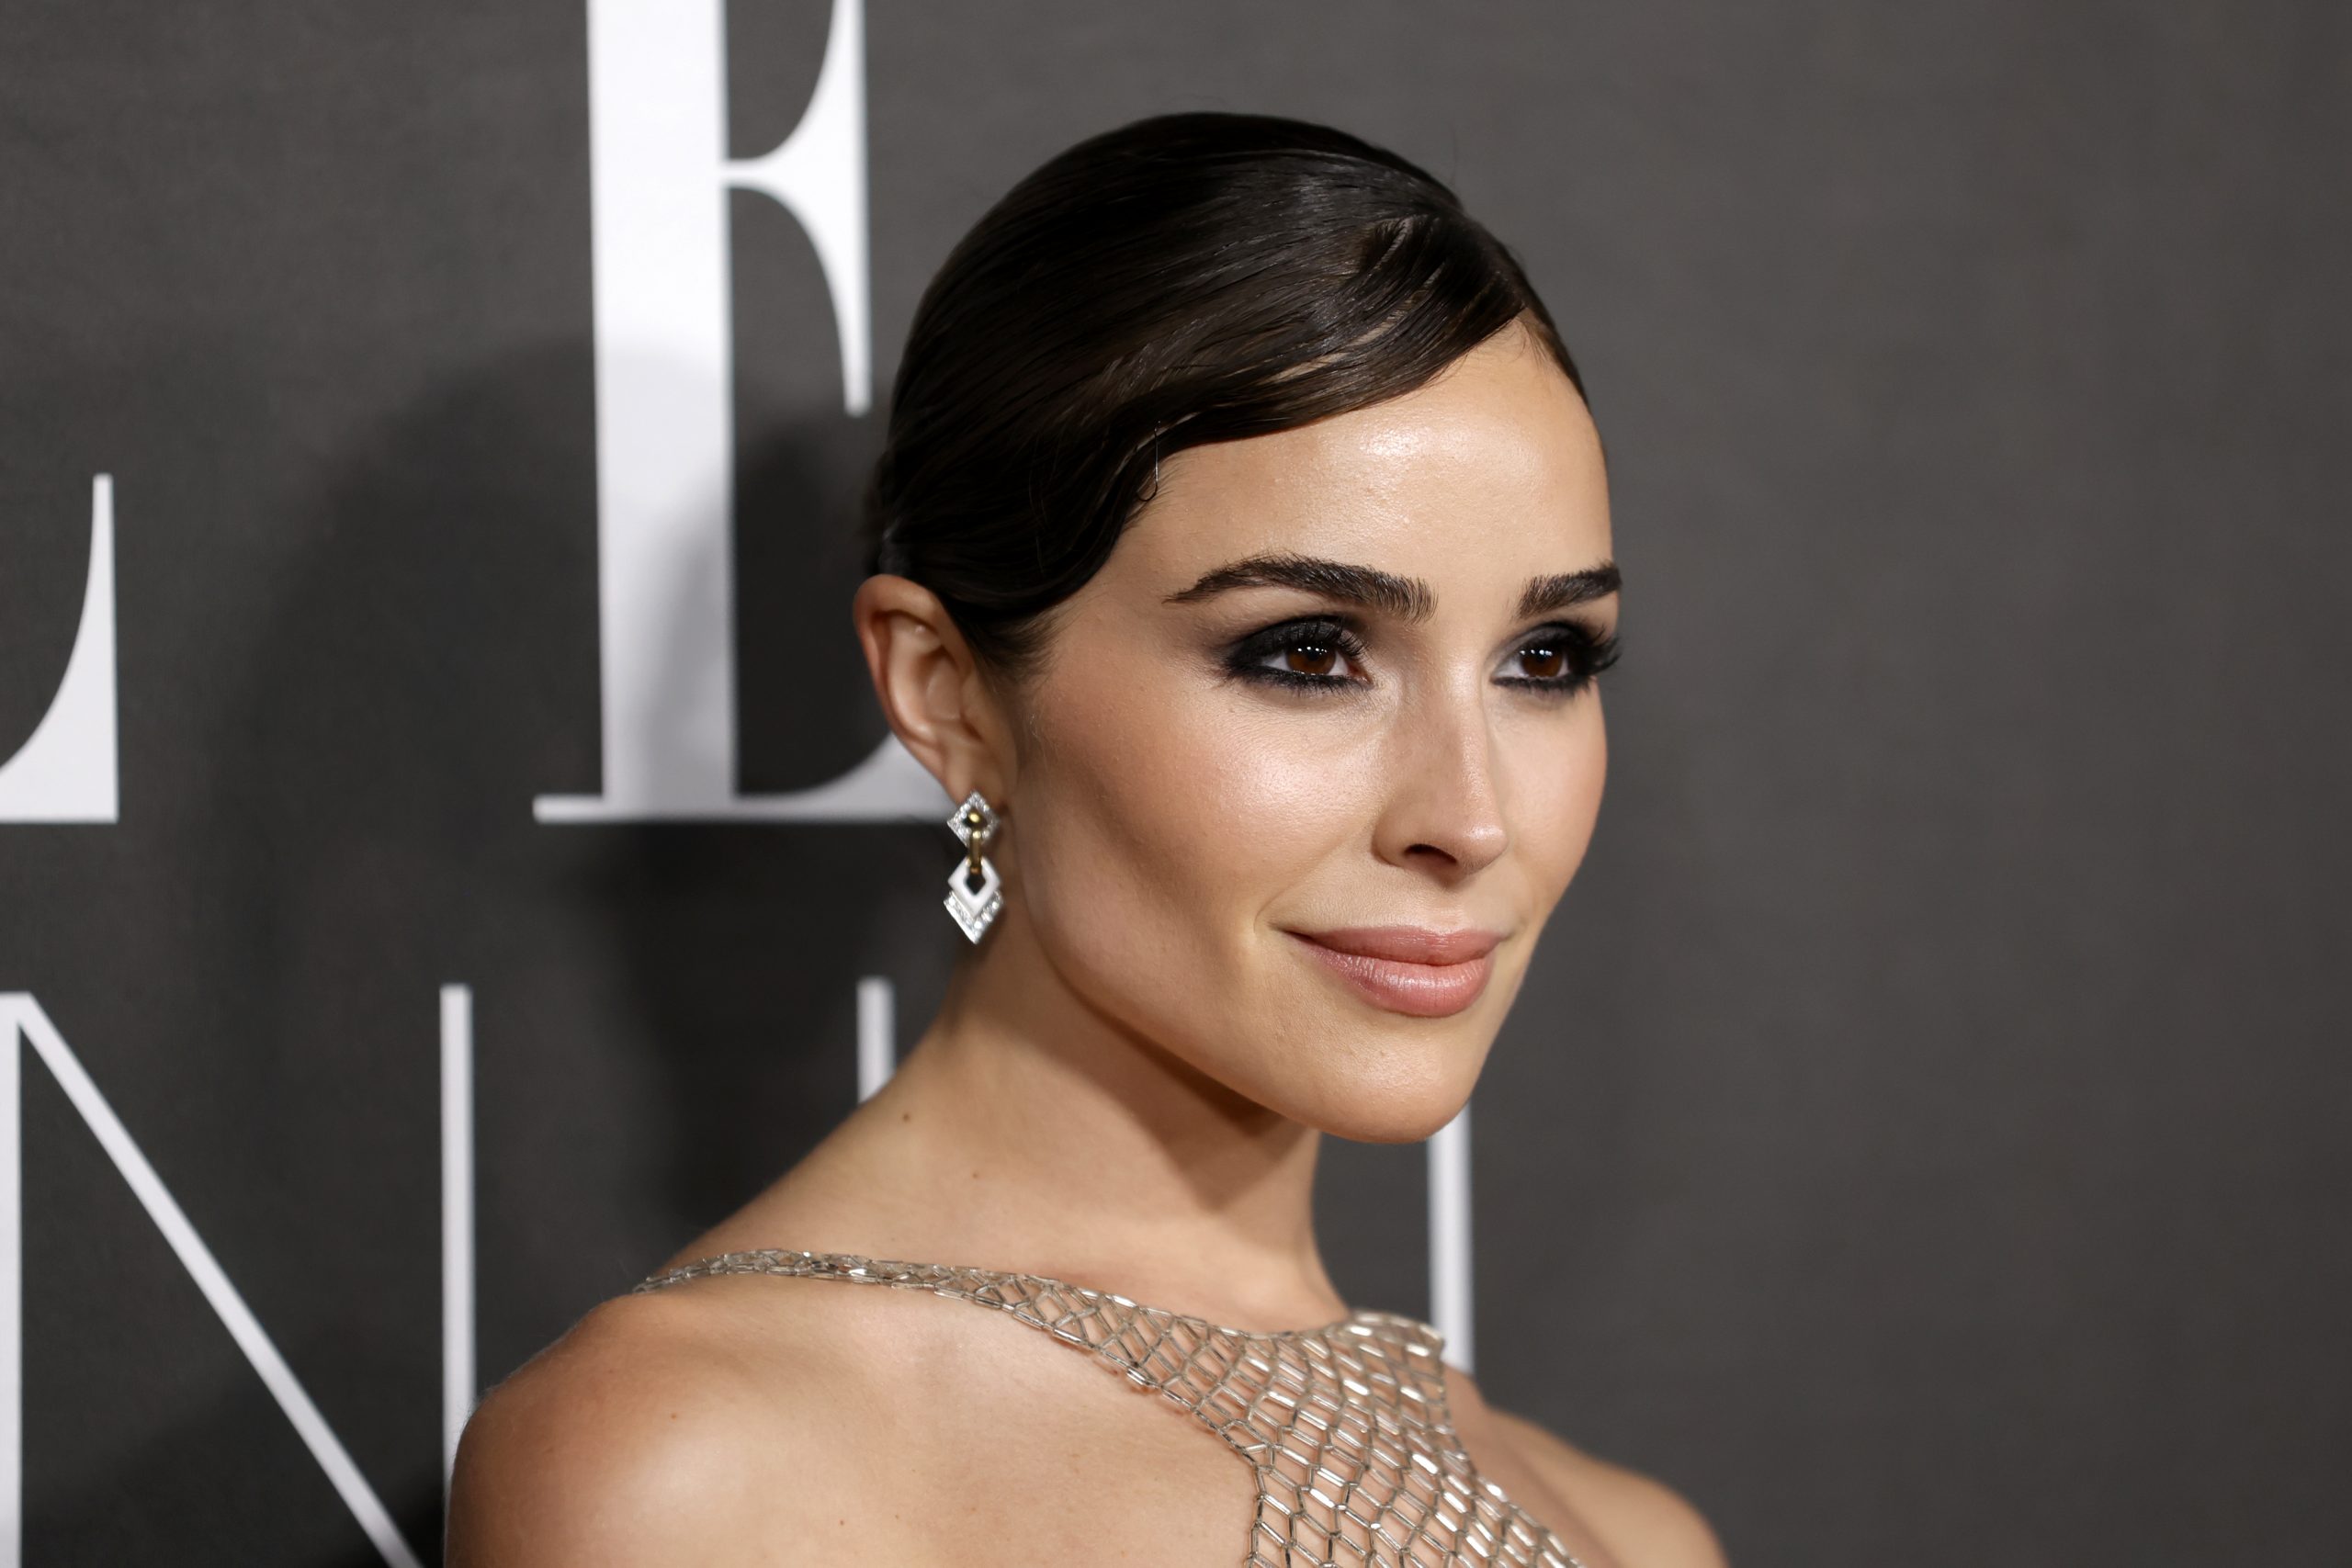 Model Olivia Culpo, 30, Shares Details About Her Endometriosis Journey pic